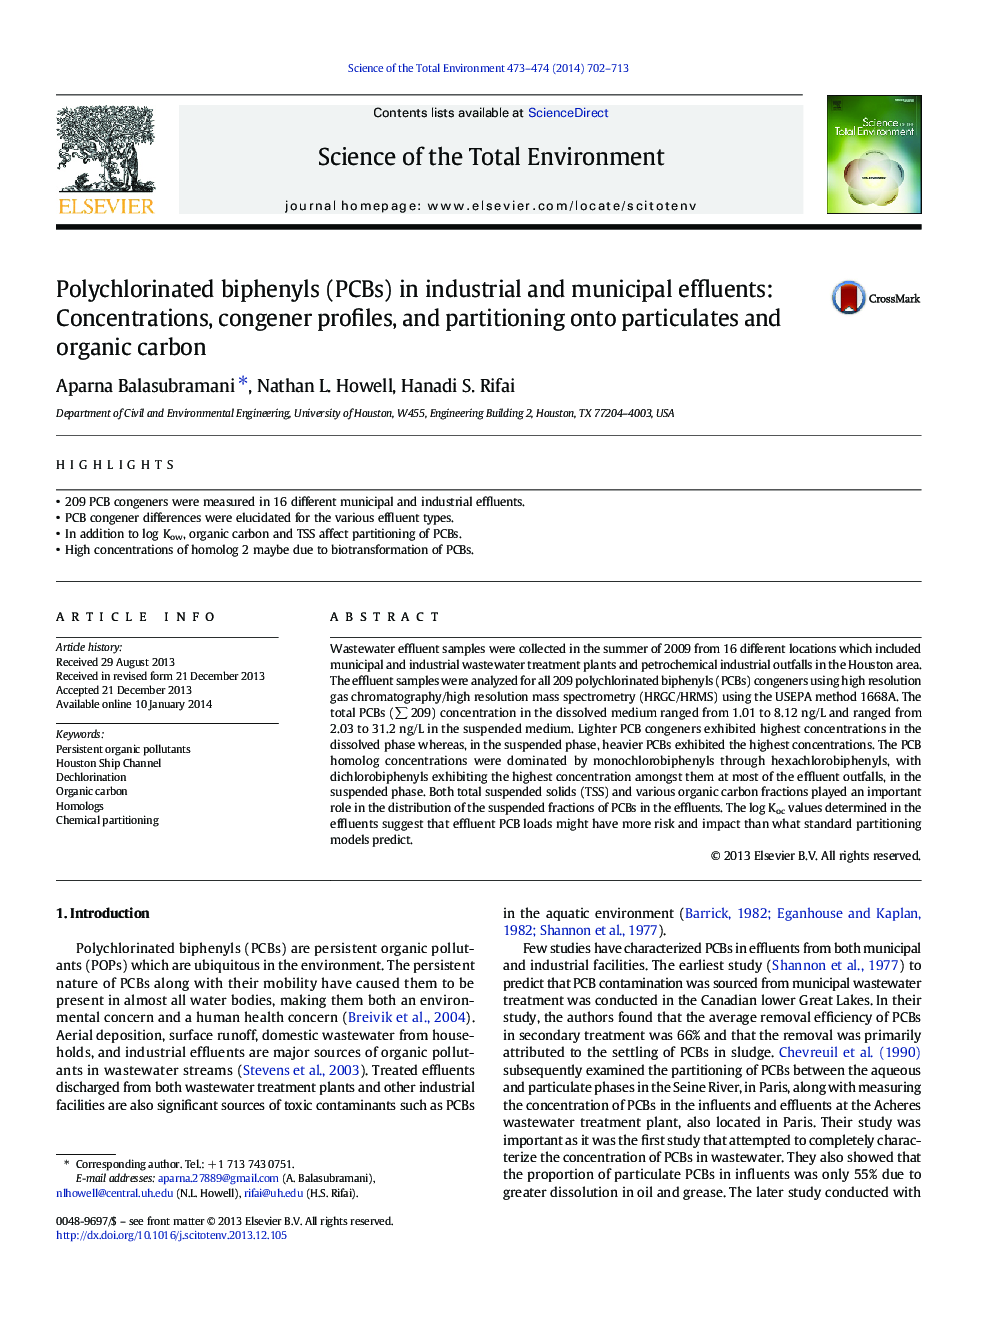 Polychlorinated biphenyls (PCBs) in industrial and municipal effluents: Concentrations, congener profiles, and partitioning onto particulates and organic carbon